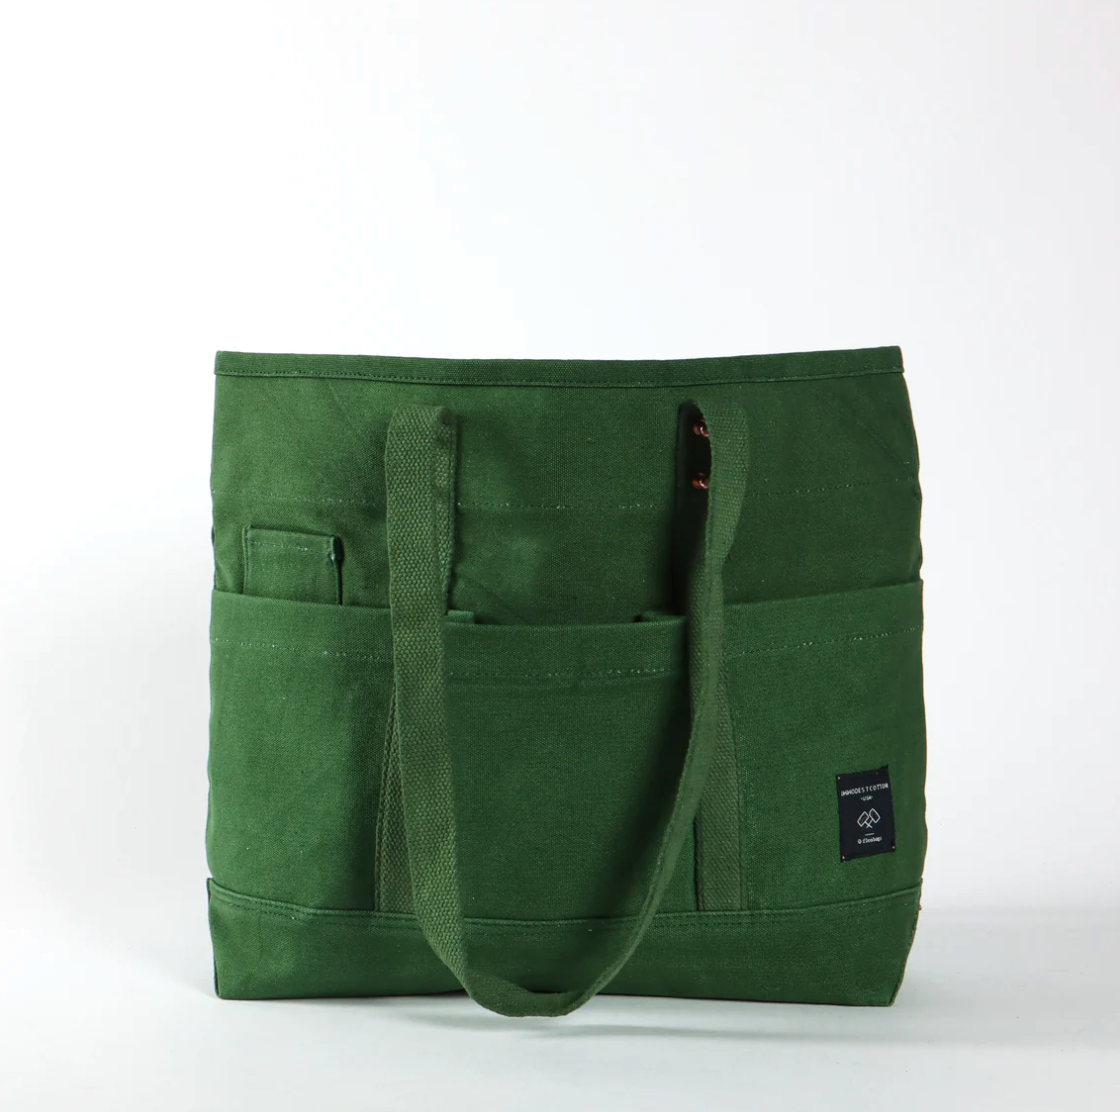 Construction Tote- Pine